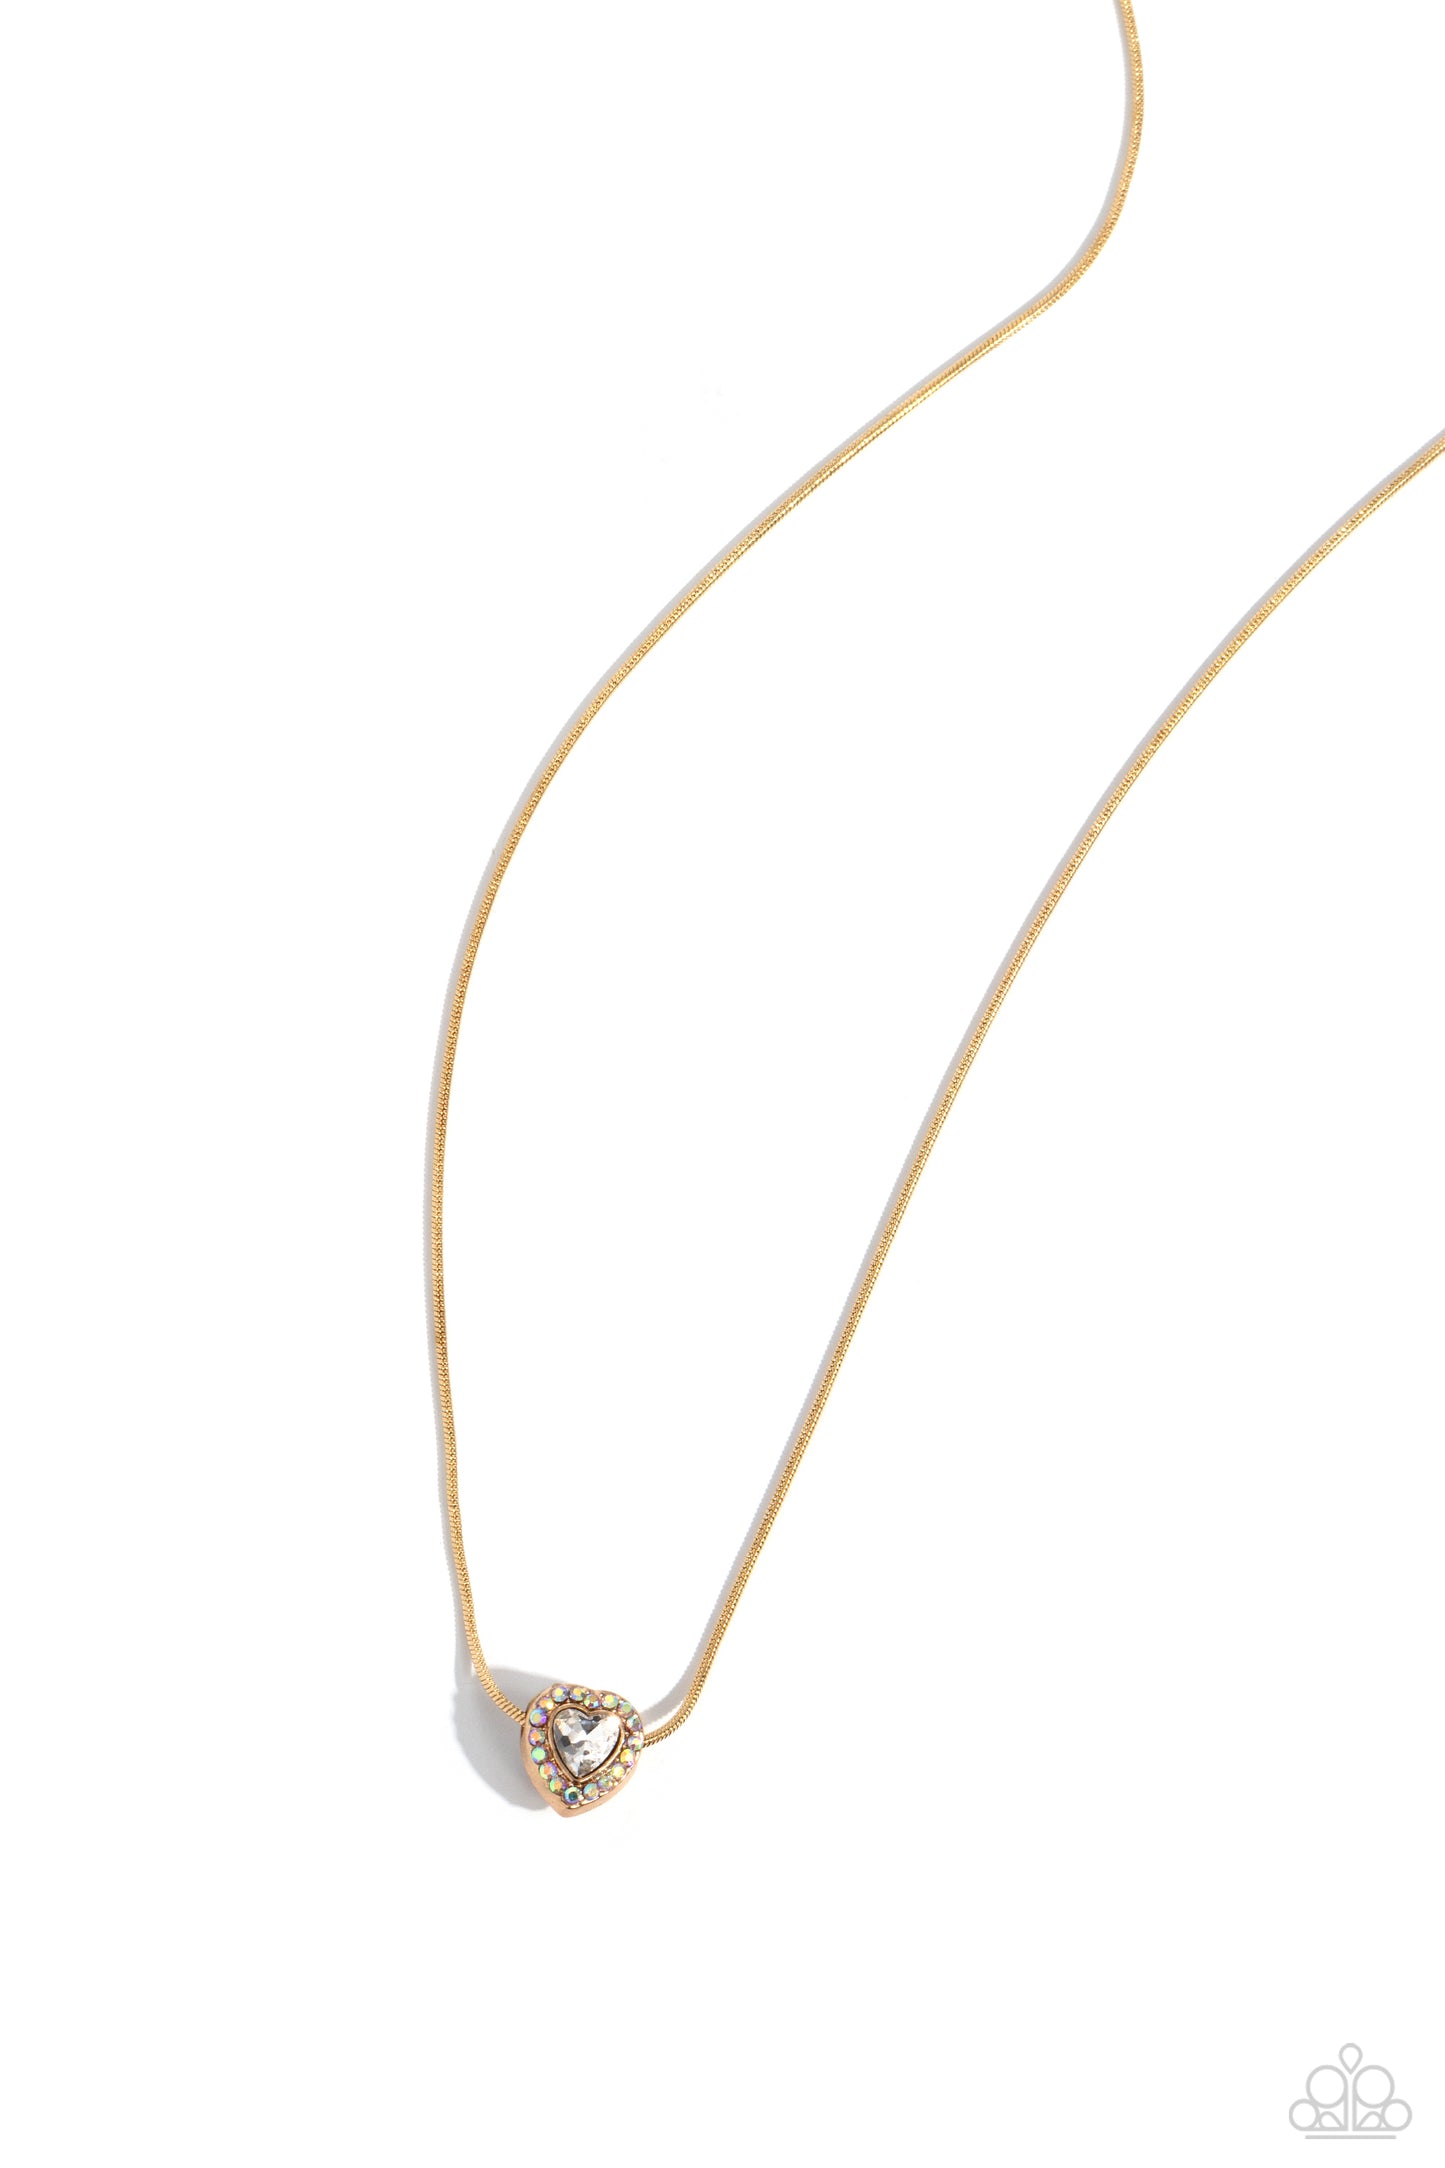 Simply Sentimental - gold - Paparazzi necklace